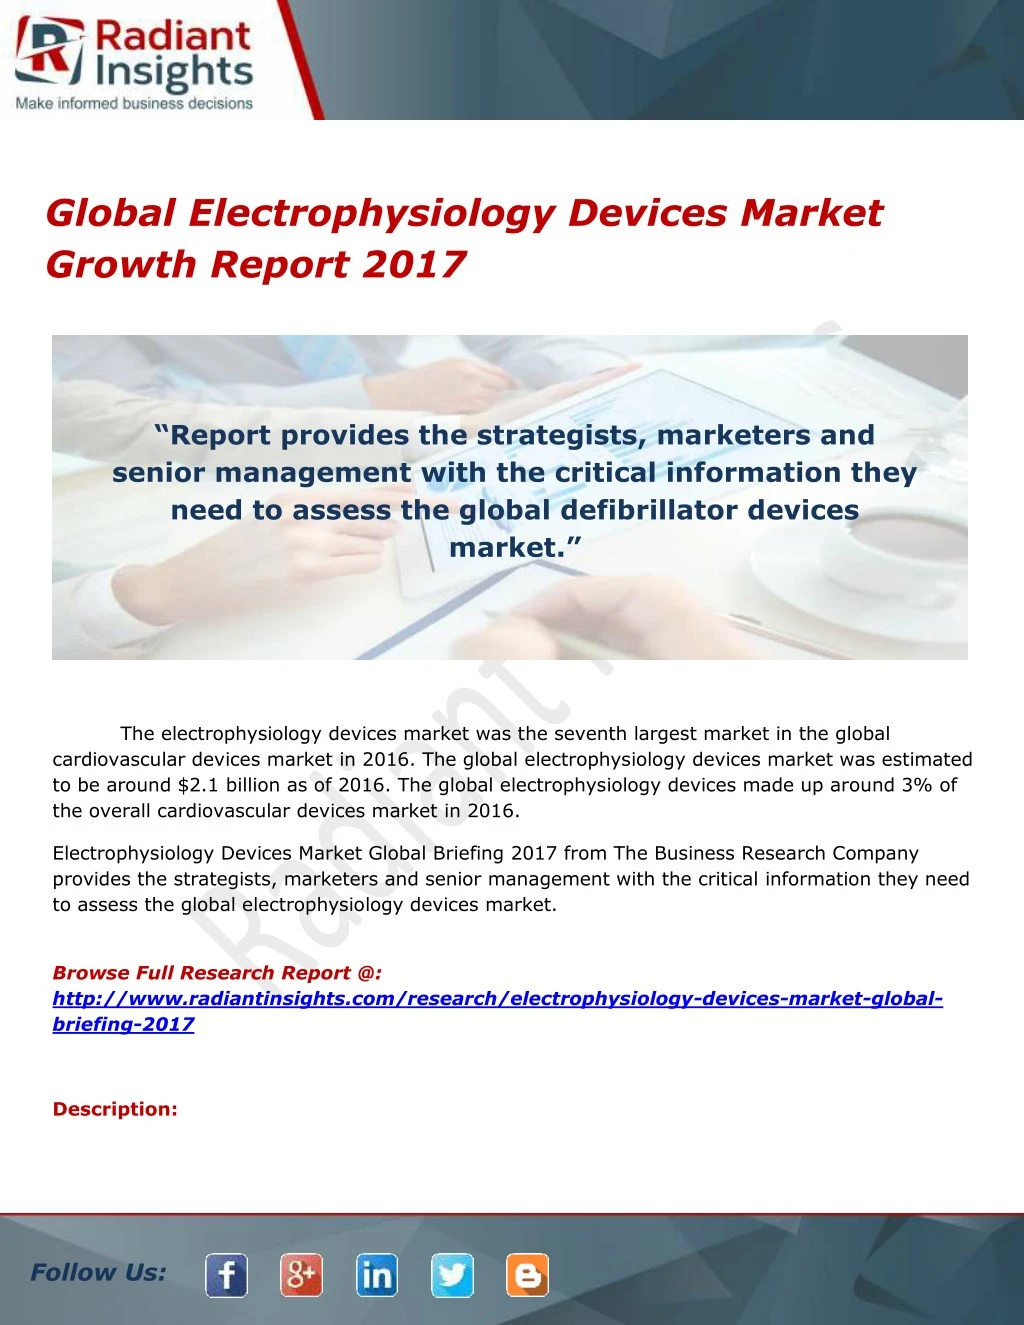 global electrophysiology devices market growth